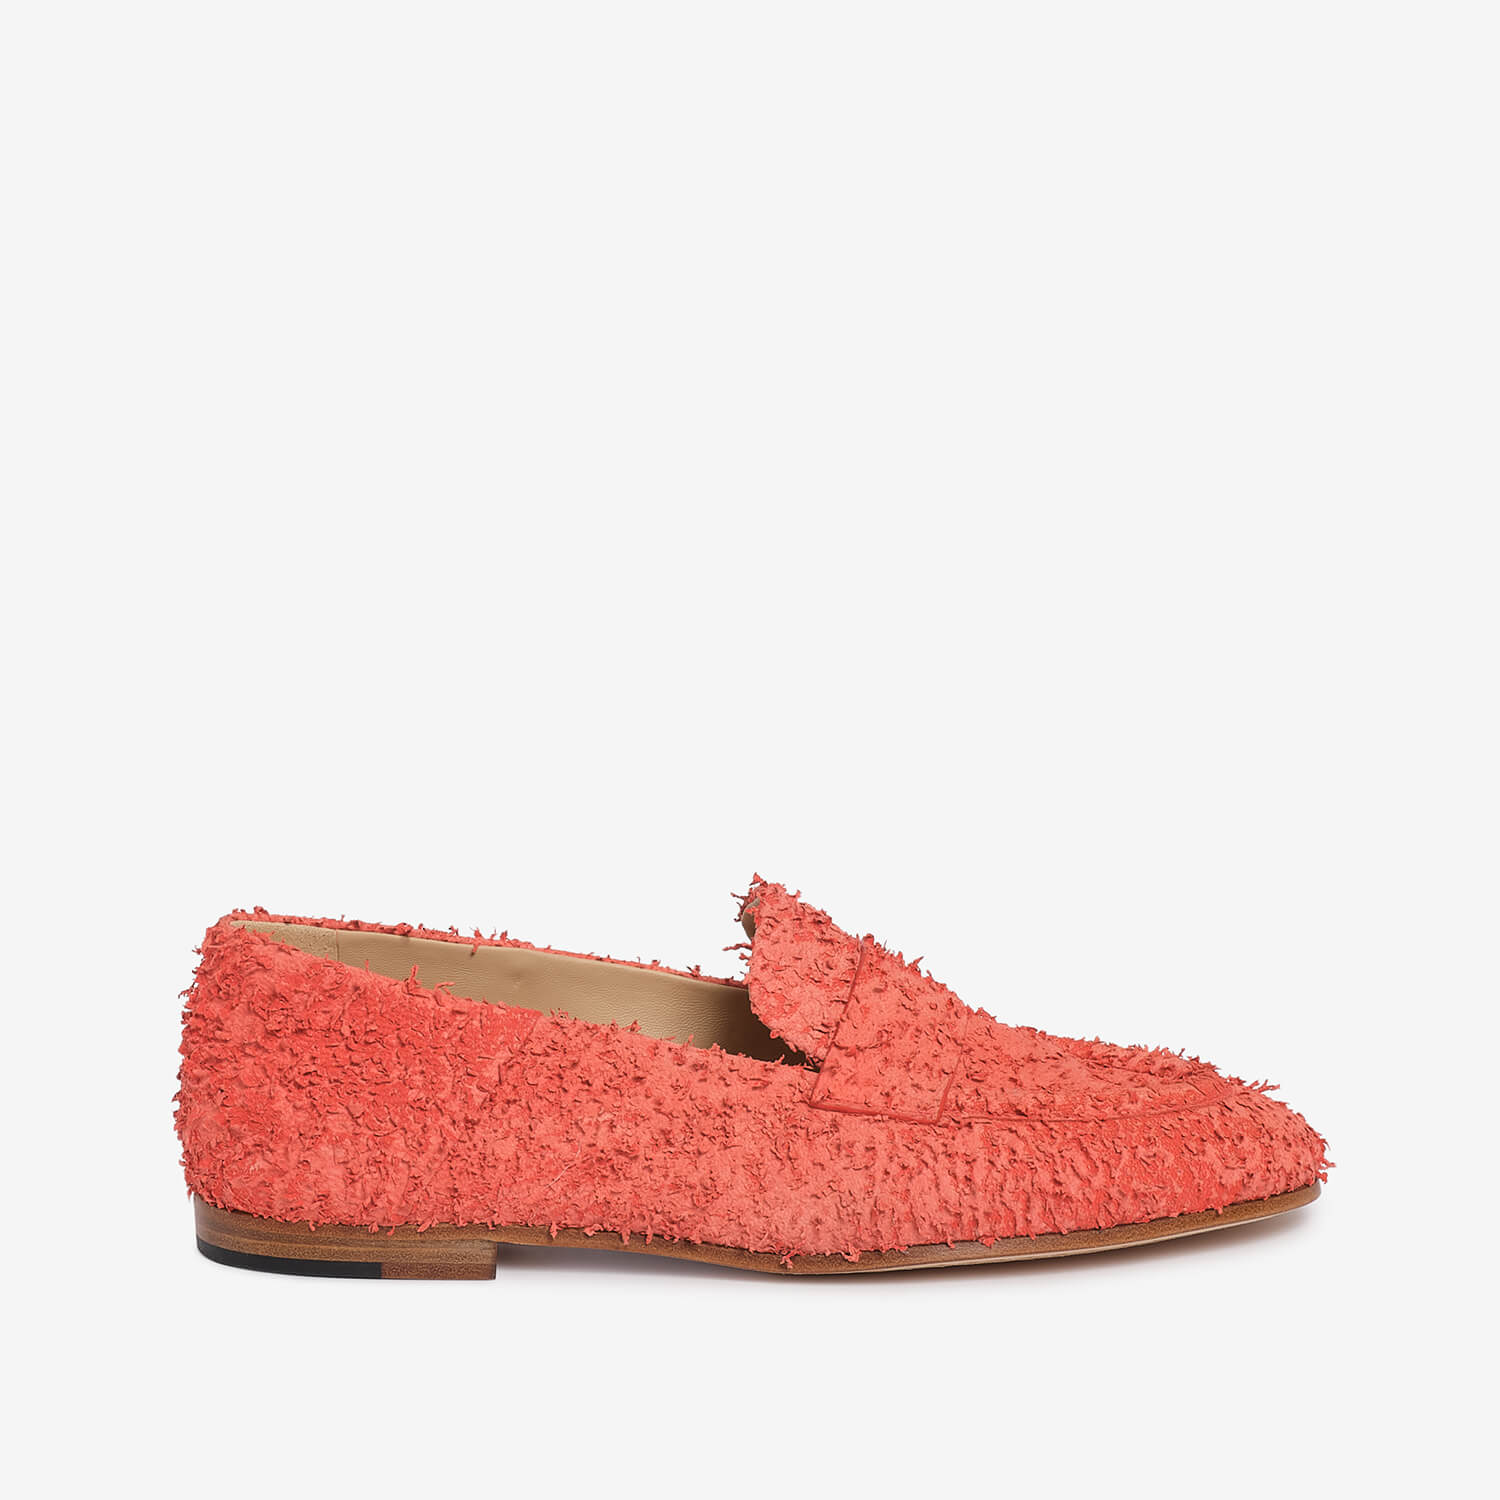 Women's leather loafer